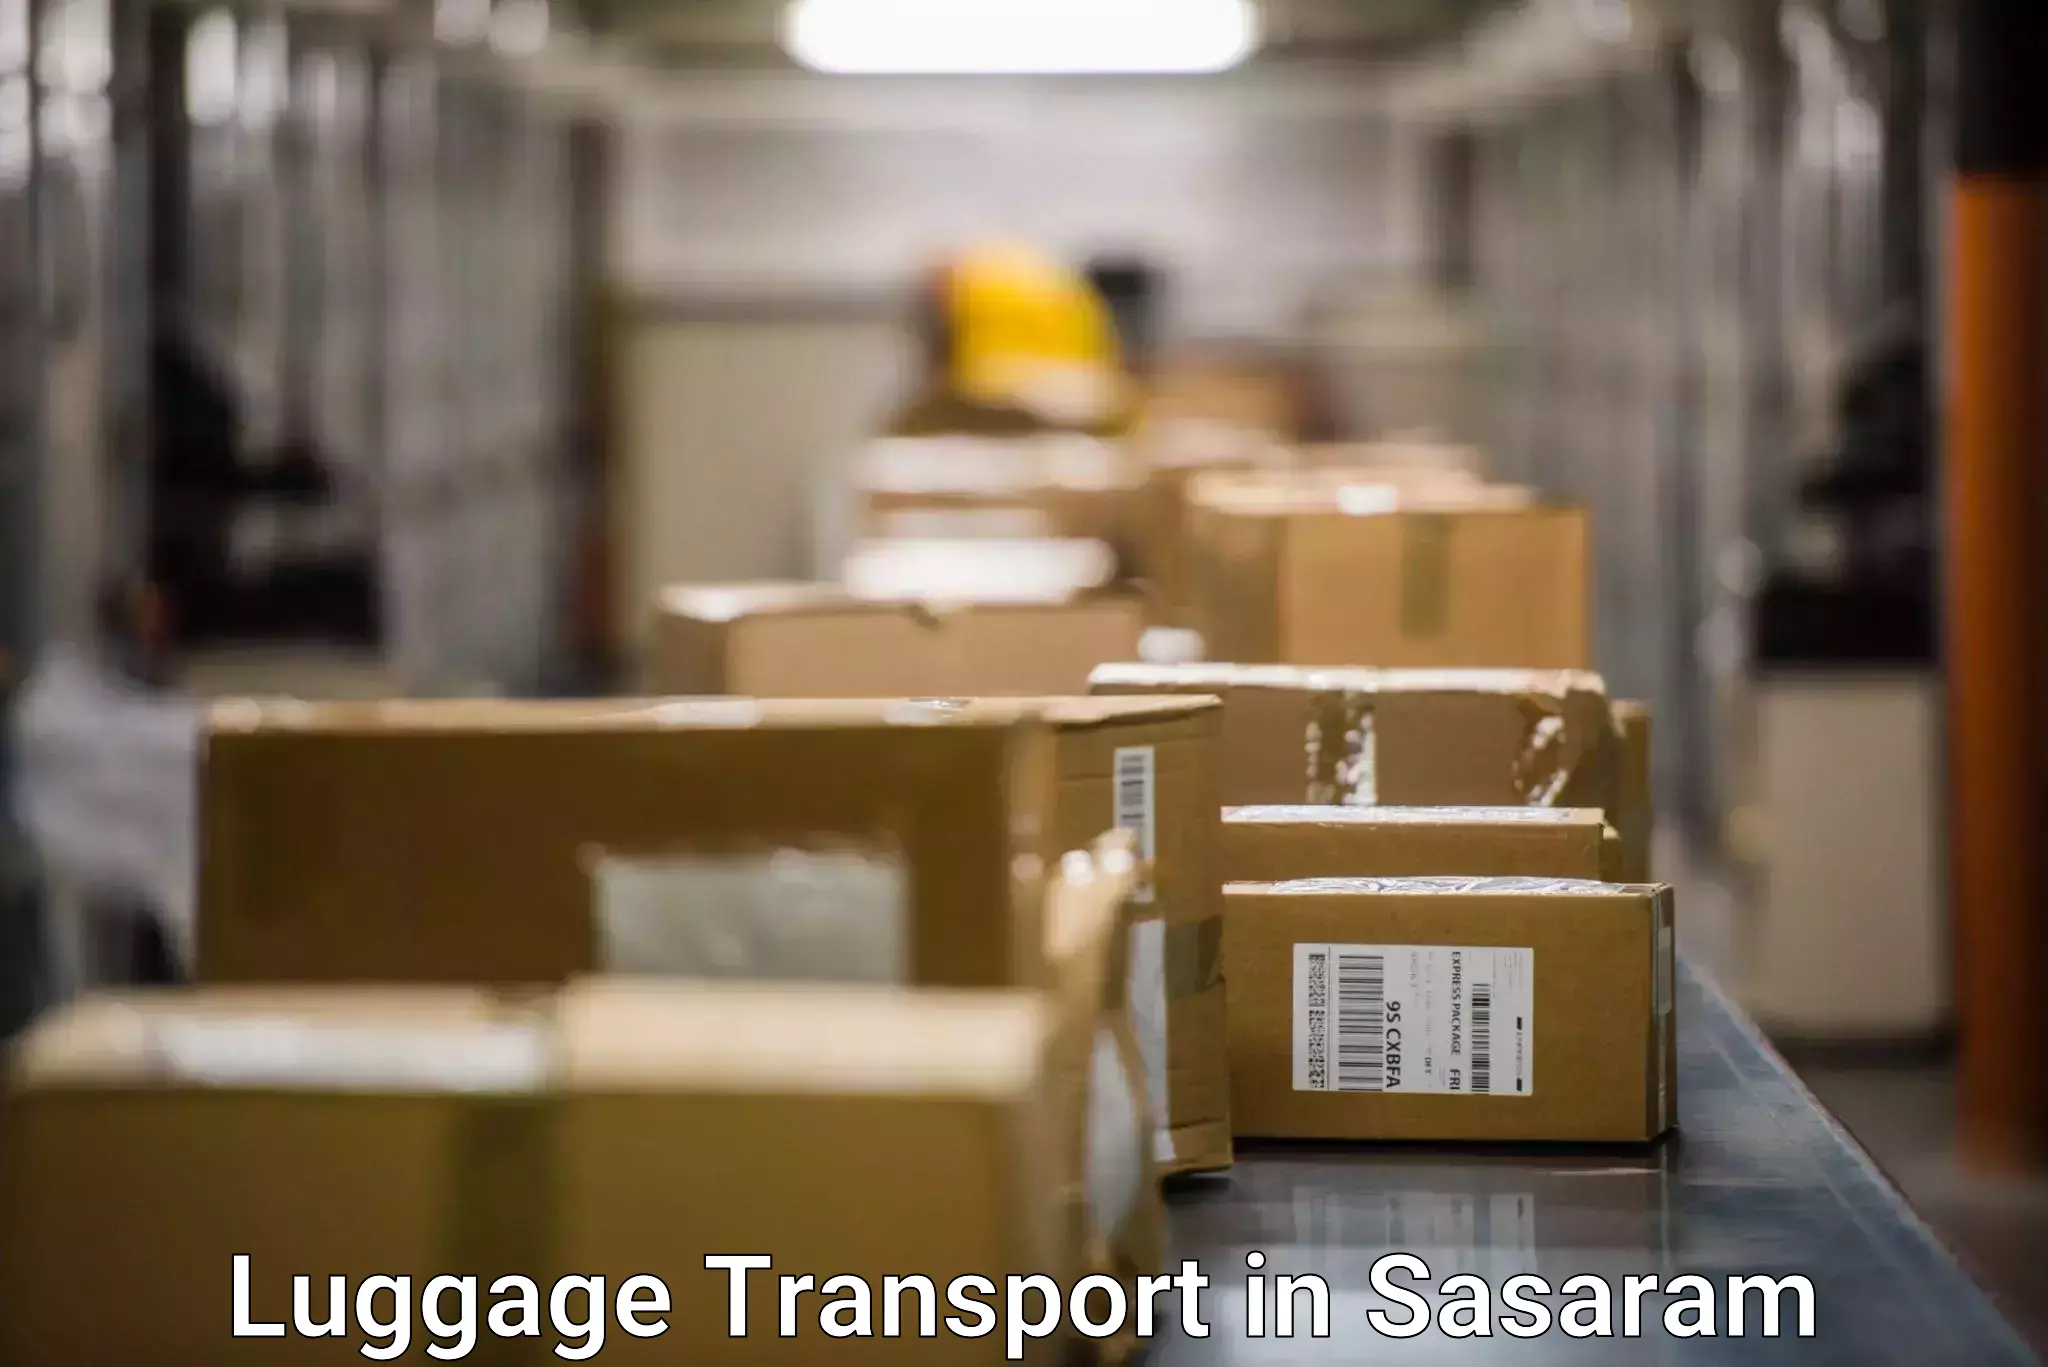 Luggage delivery solutions in Sasaram